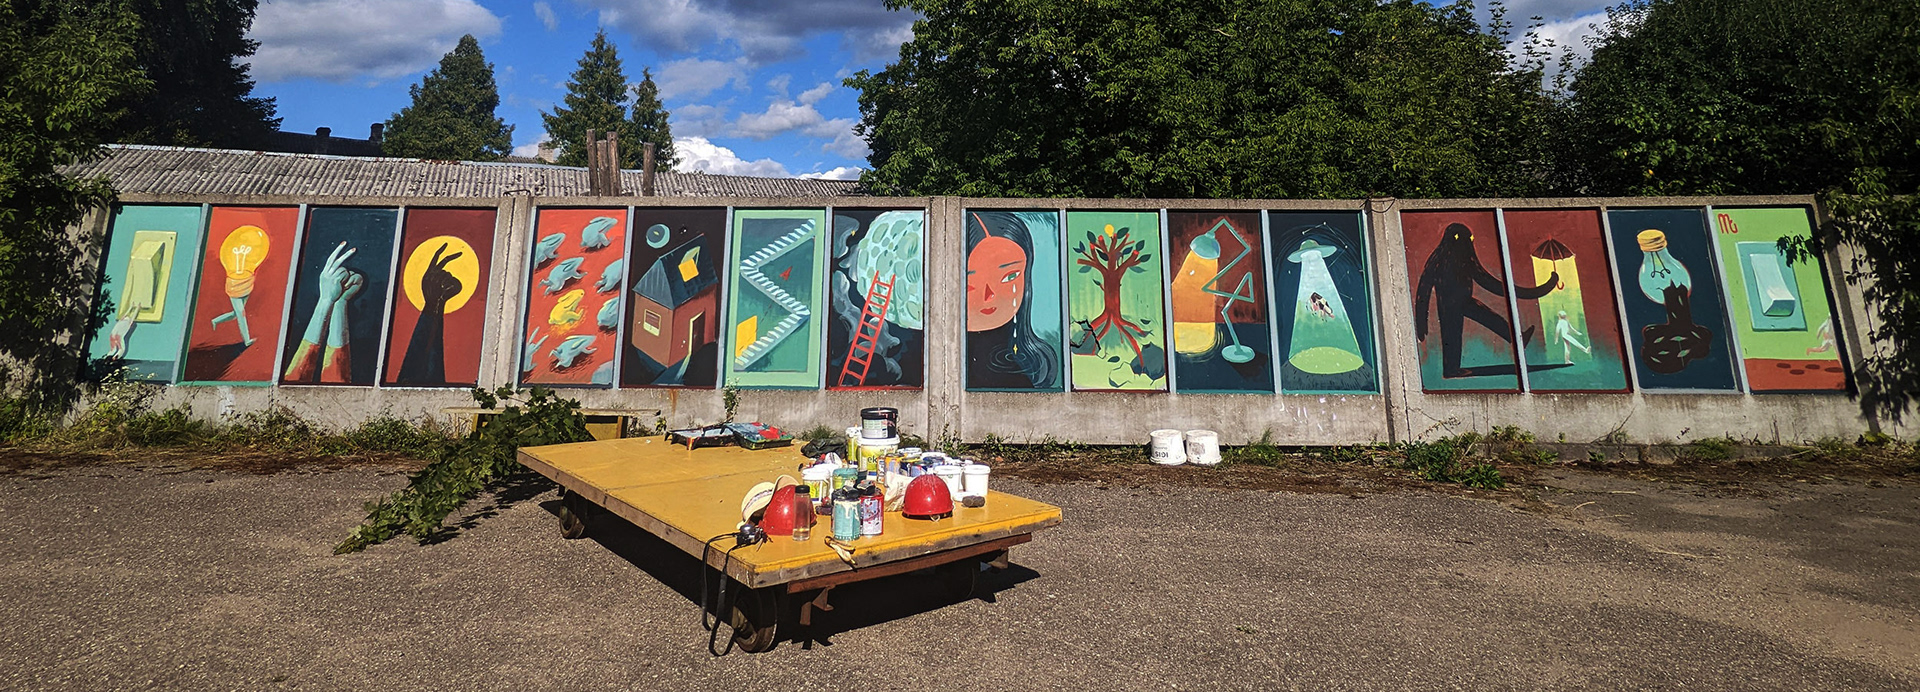 A wide shot of a mural depicting 16 panels, each with a different scene. In the foreground sits a cart with painting supplies.